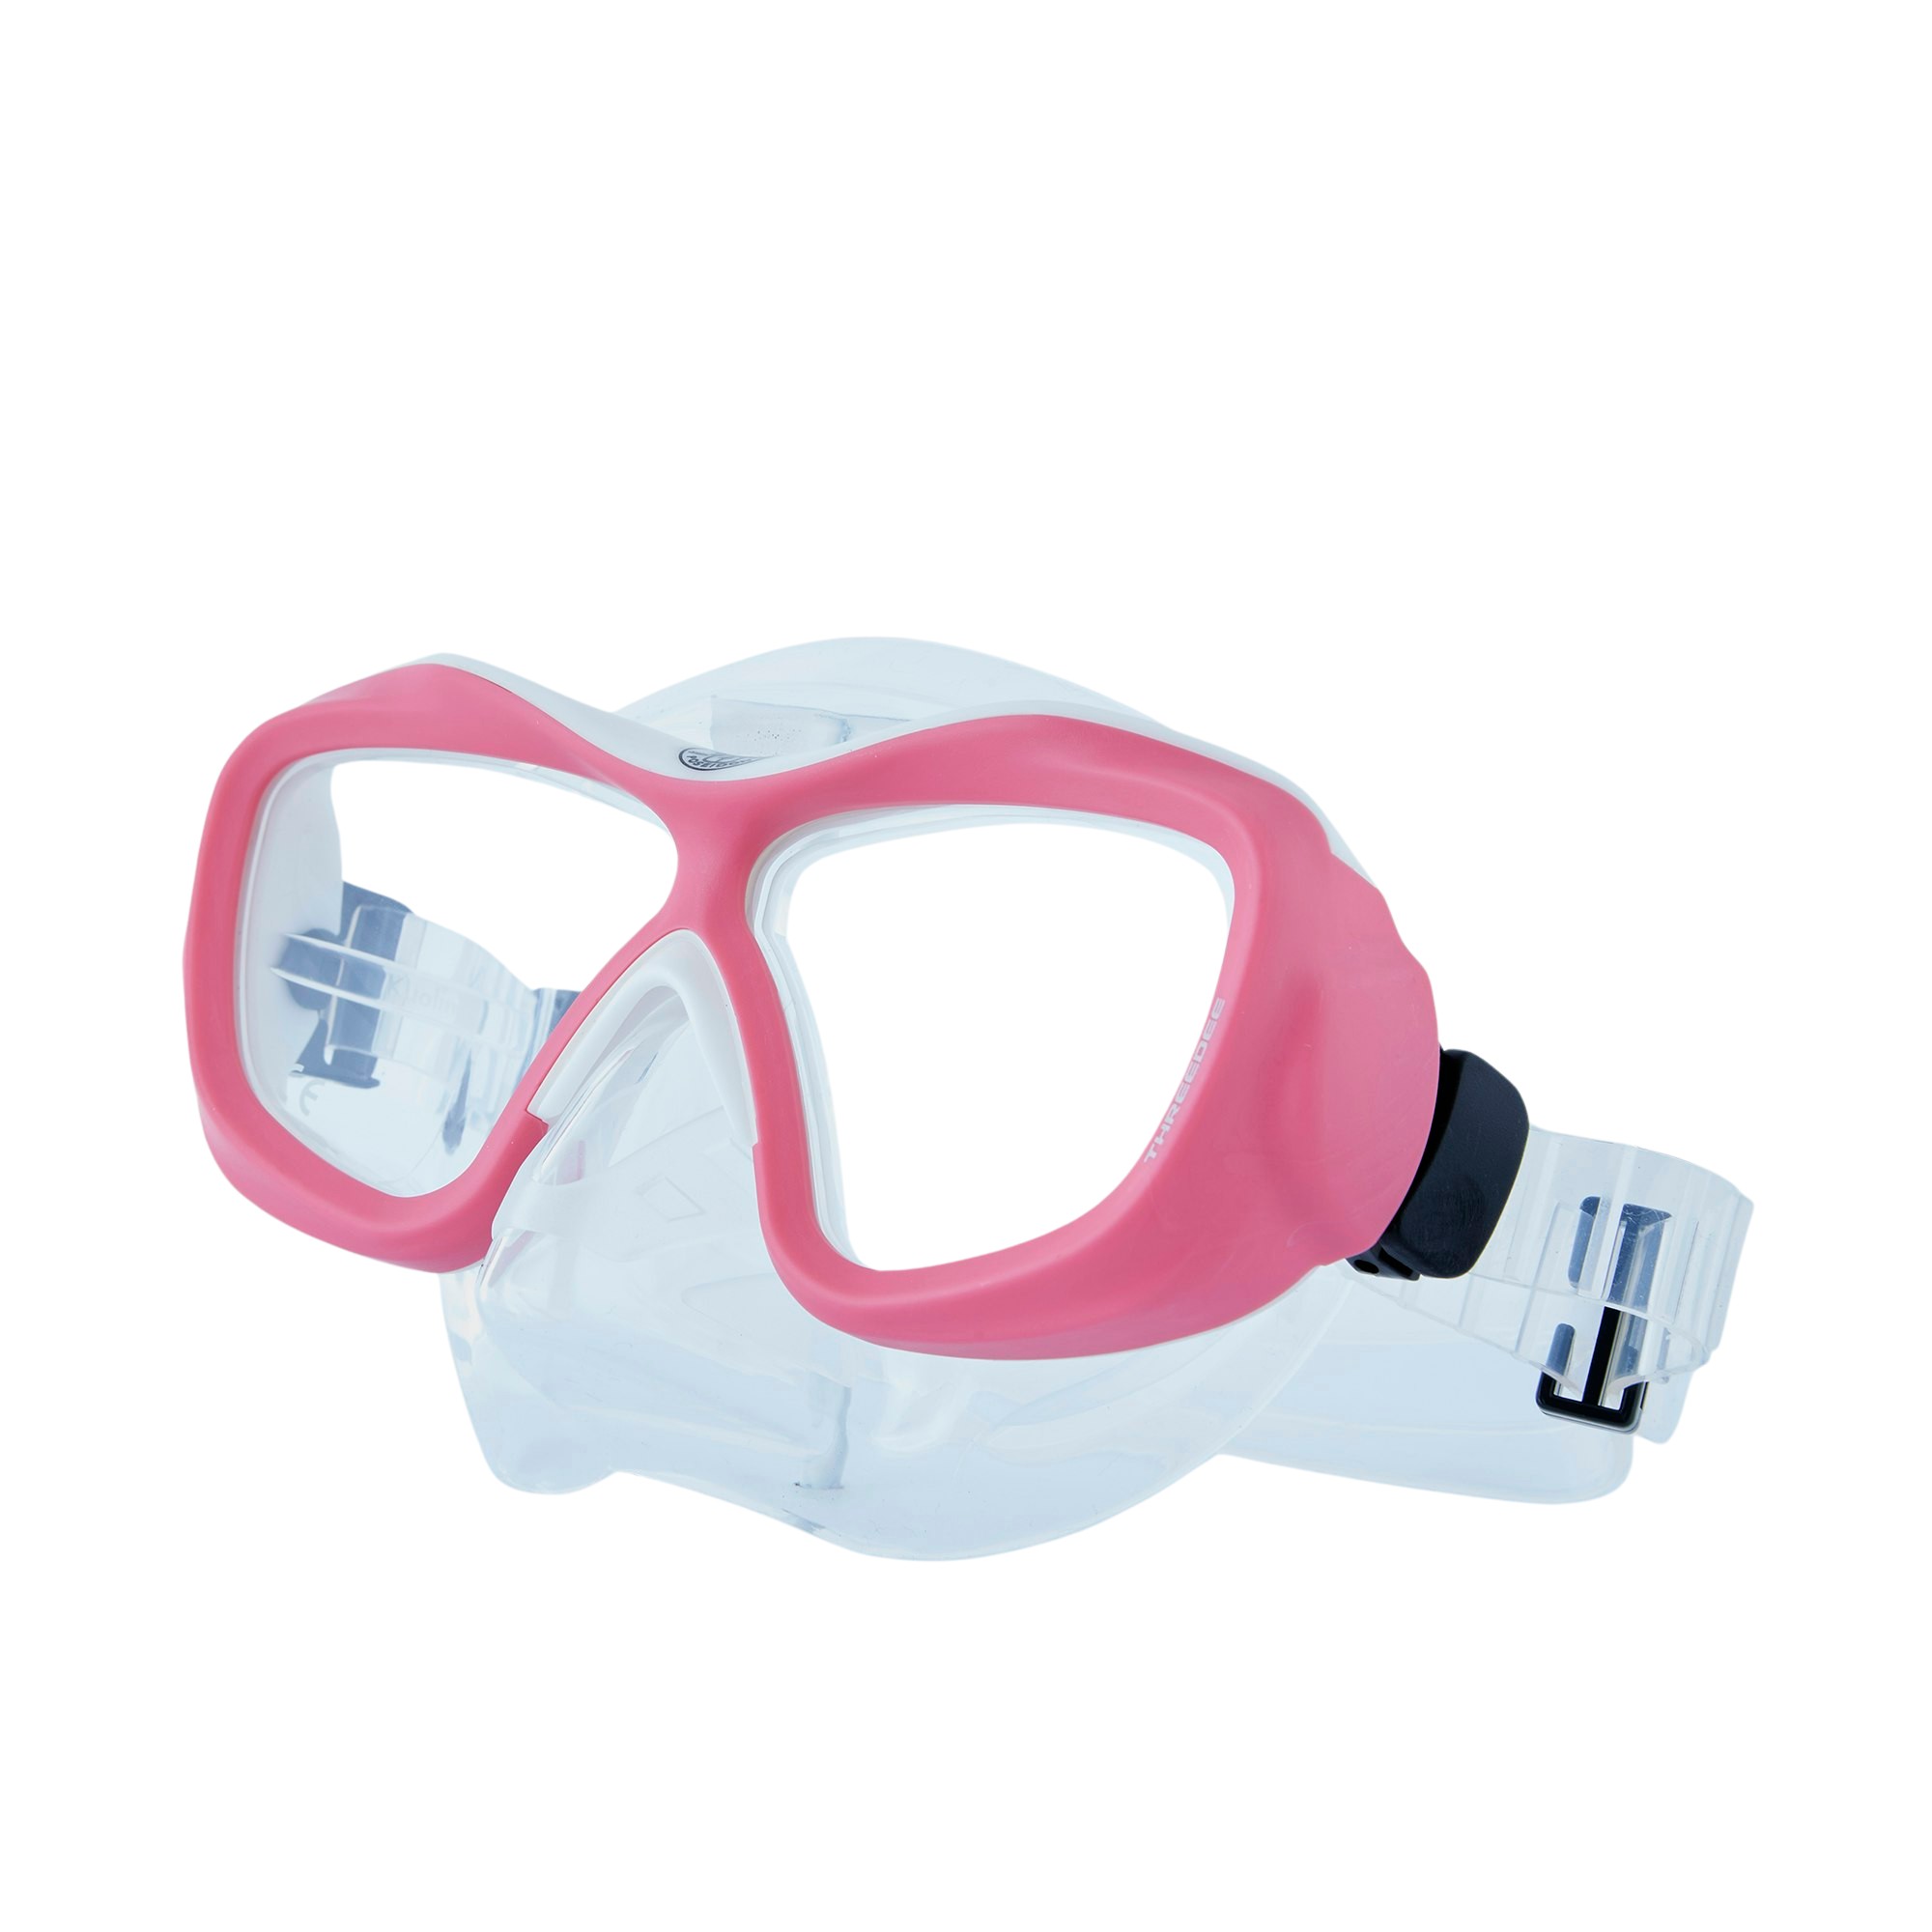 Mask 3D - Pink/White, Clear Silic